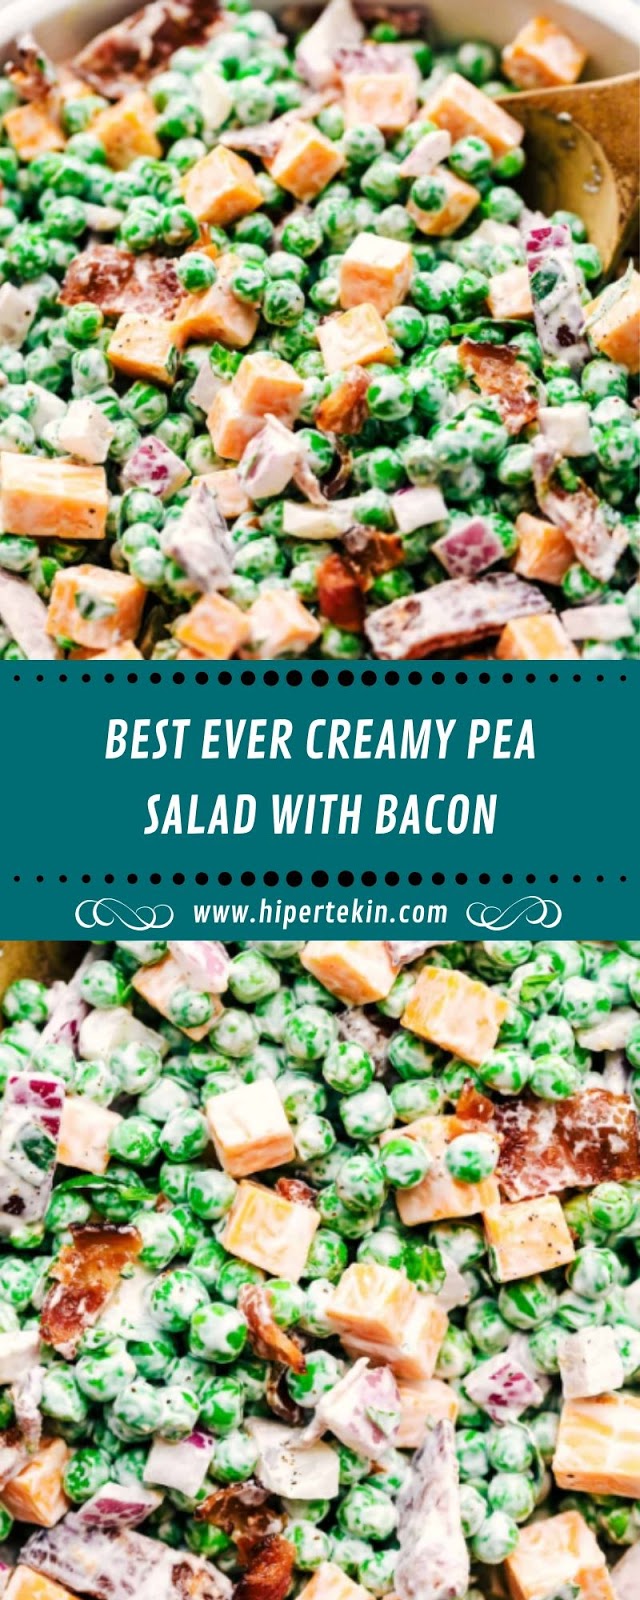 BEST EVER CREAMY PEA SALAD WITH BACON